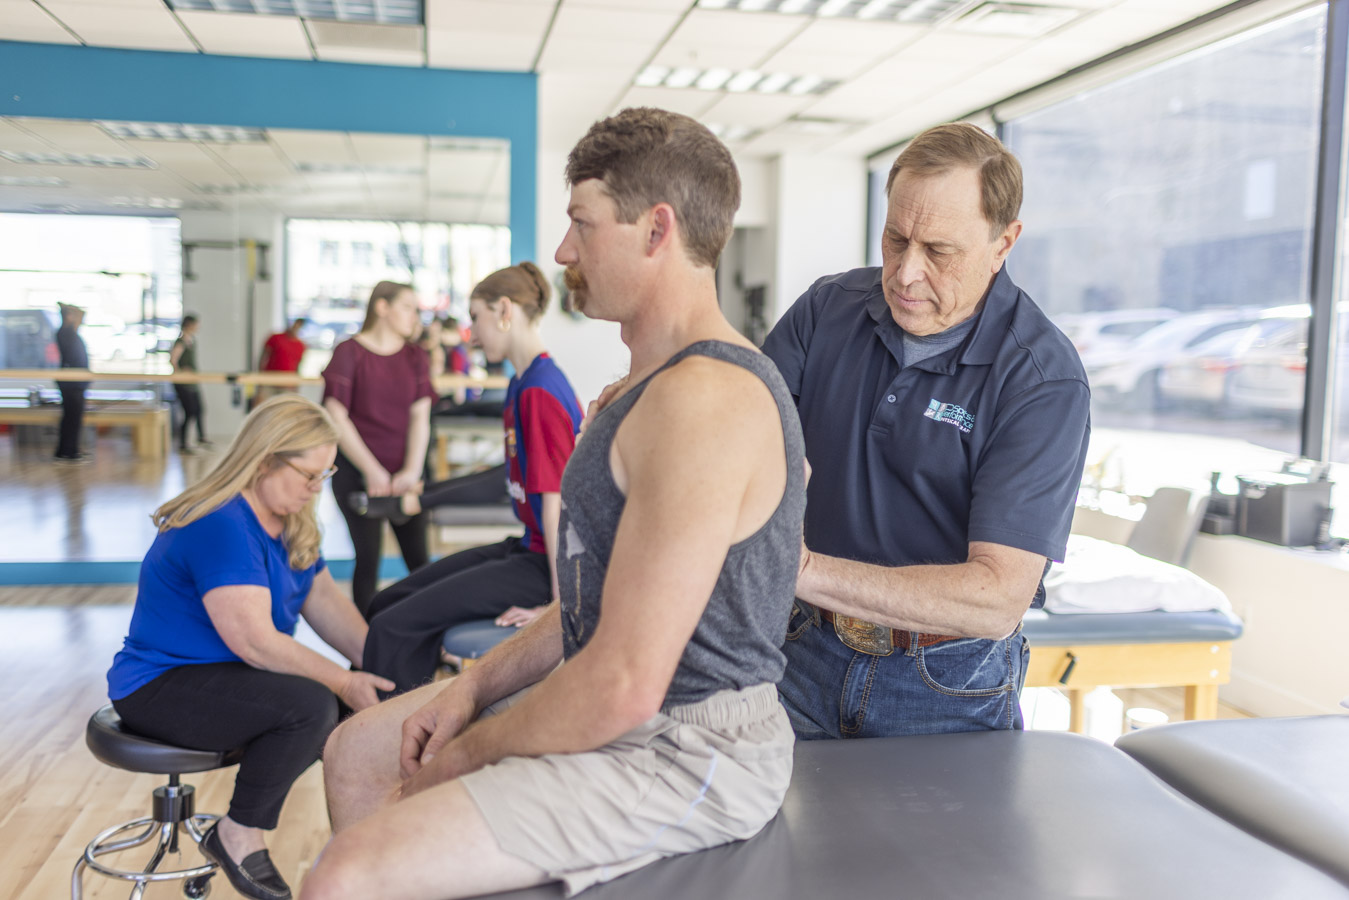 Physical therapists working with multiple patients. In the foreground, the patient is sitting facing to the left while the athletic trainer works on a spot on his back.